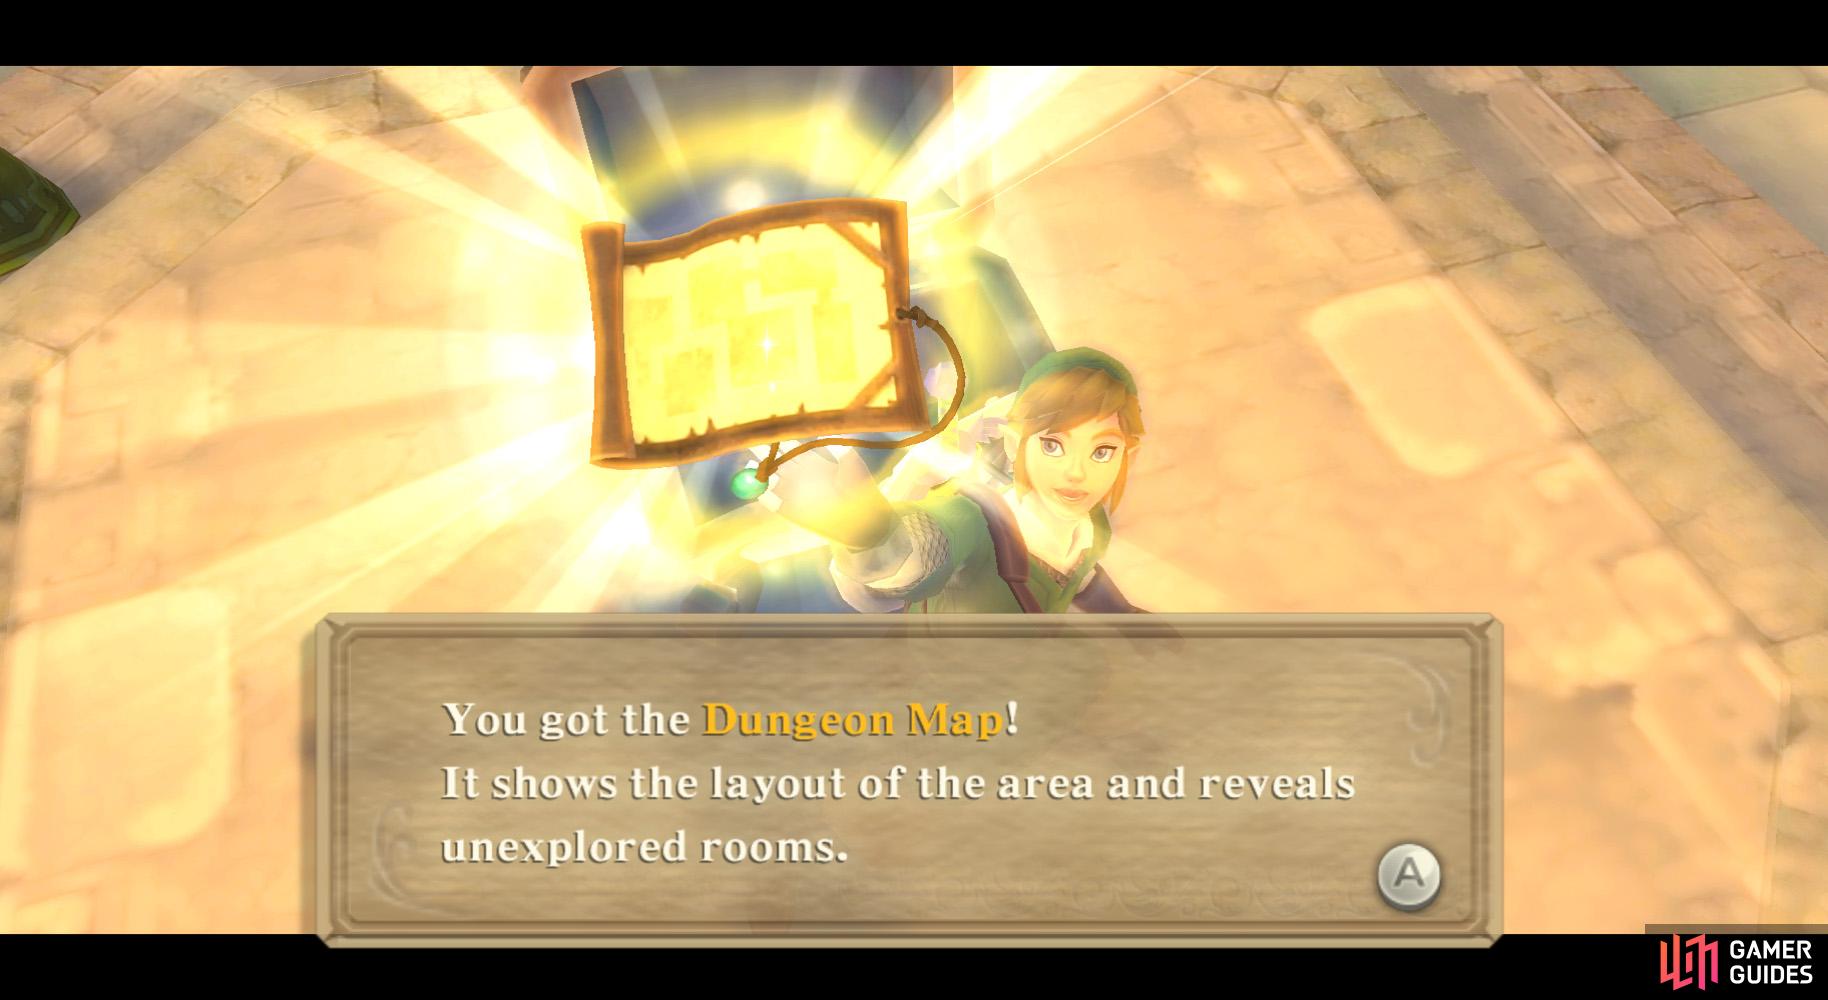 Youll obtain the Dungeon Map right at the beginning.